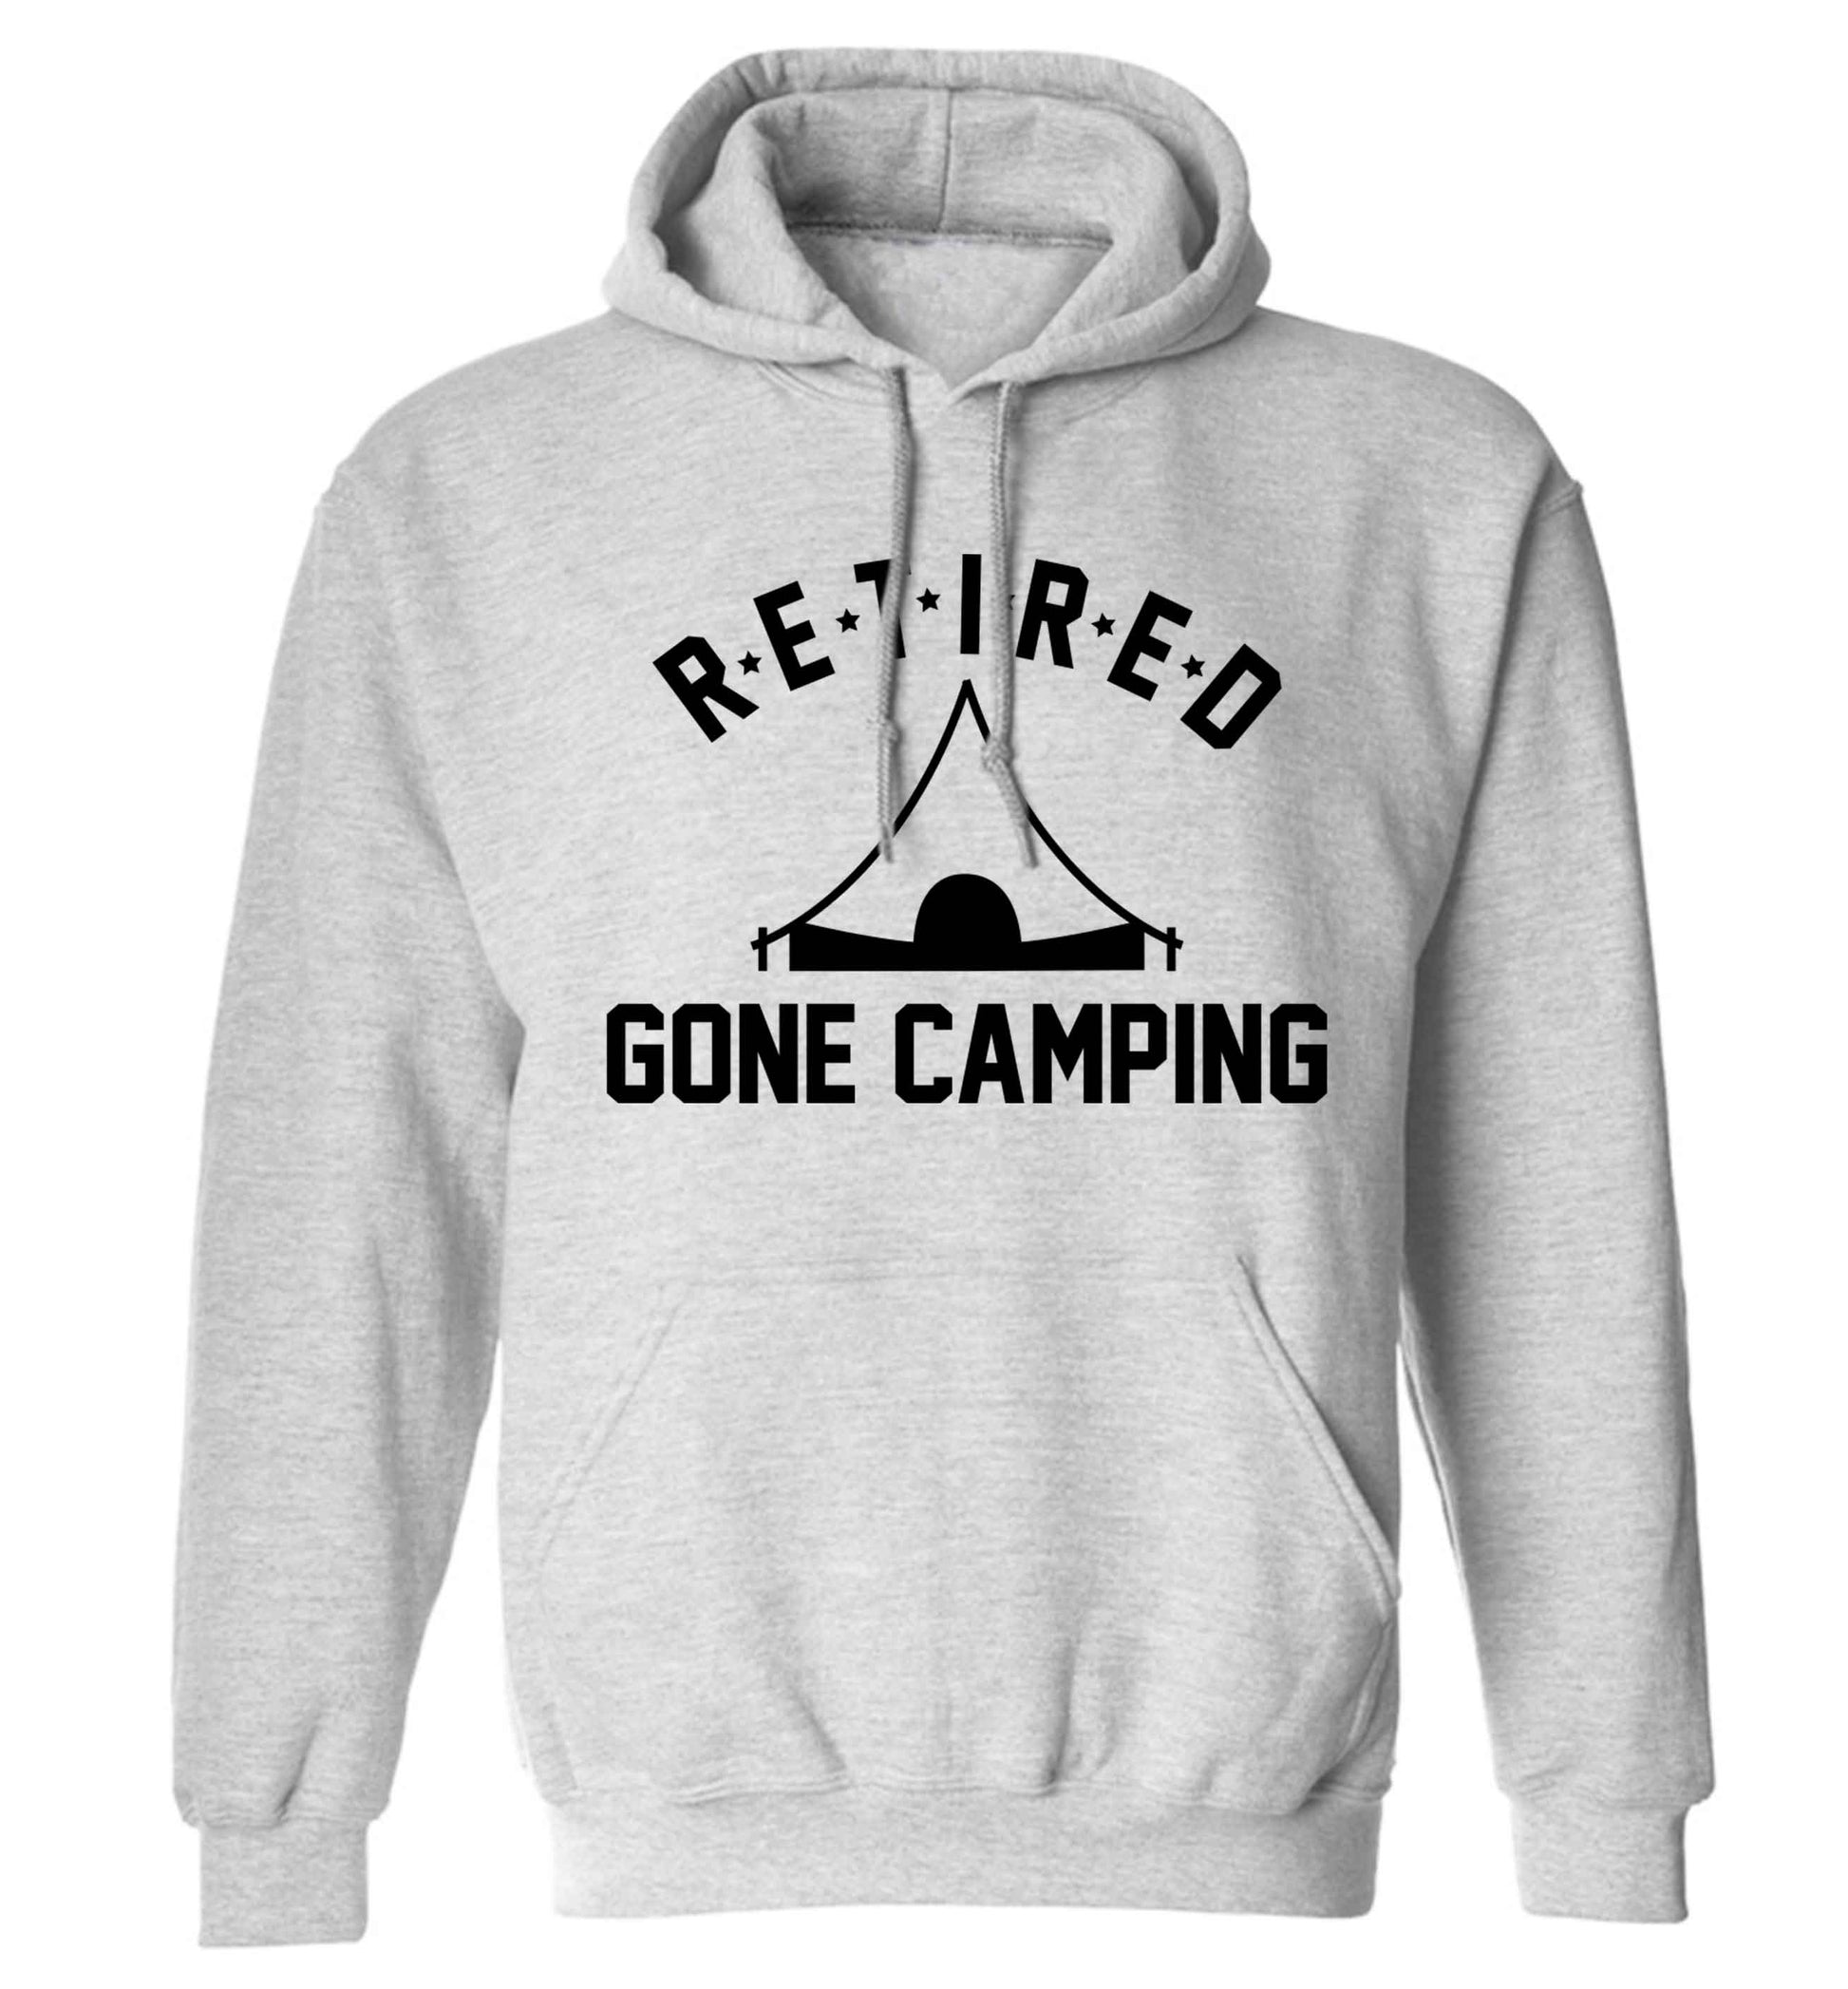 Retired gone camping adults unisex grey hoodie 2XL